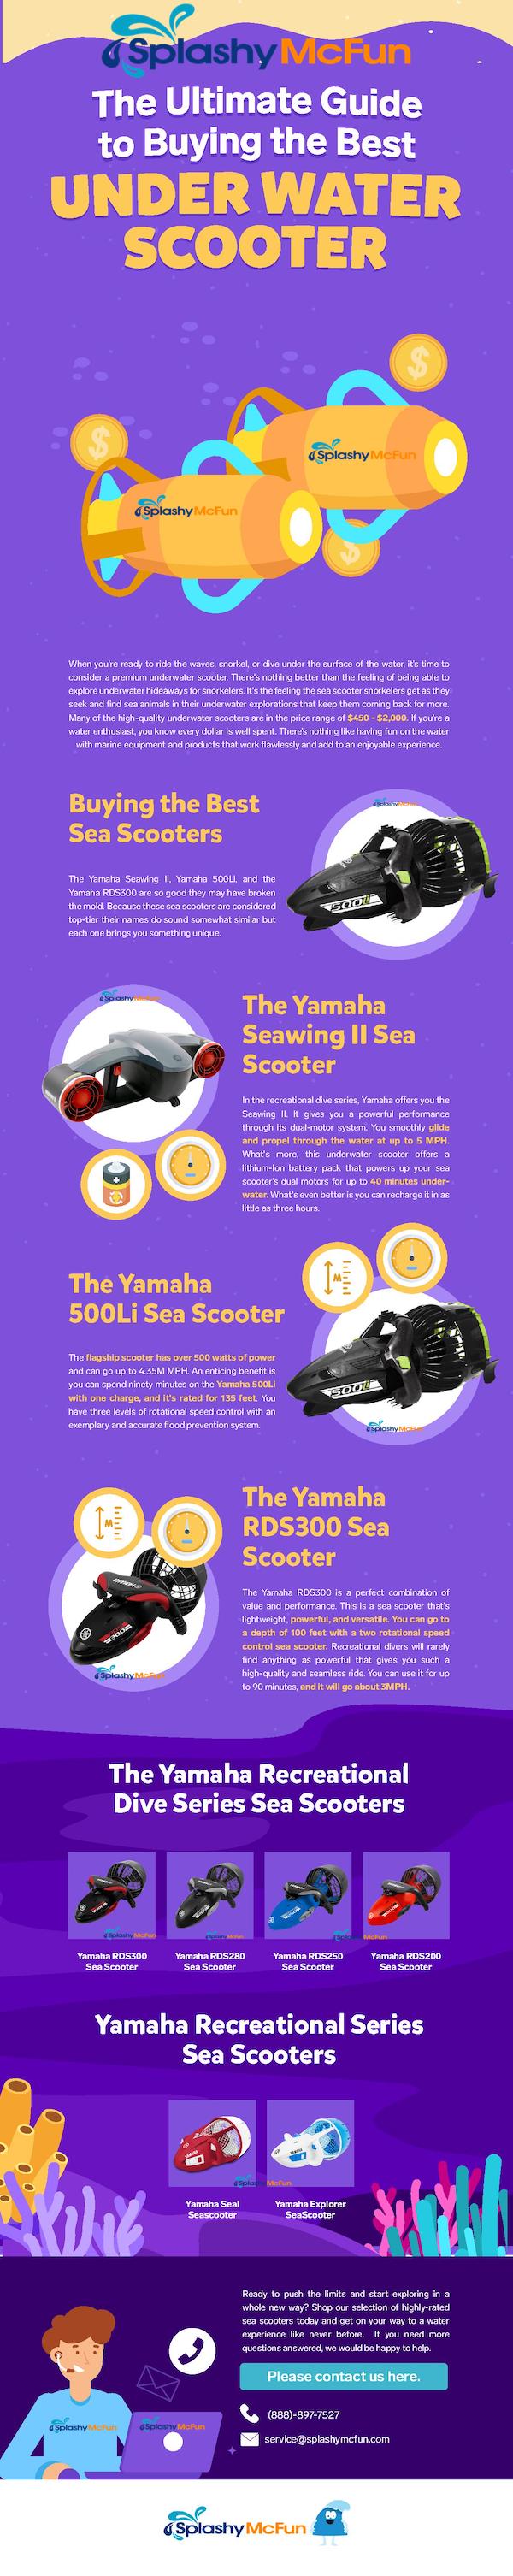 Ultimate Guide to Buying the Best Under Water Scooter Infographic